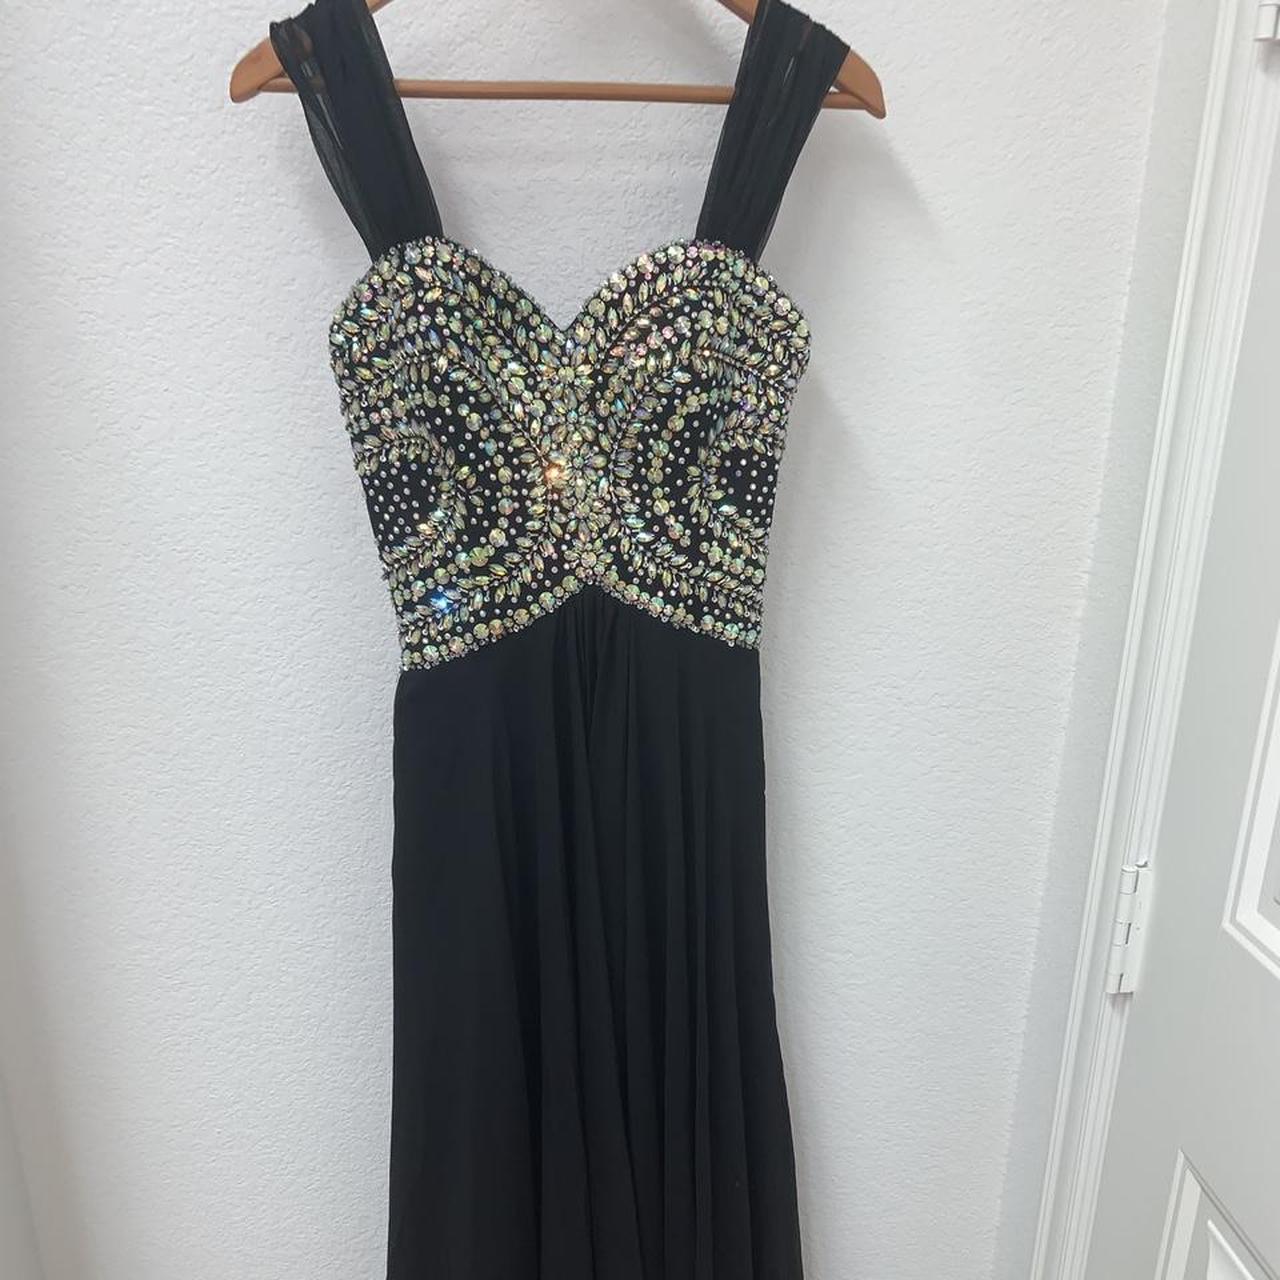 Women's Black and Silver Dress